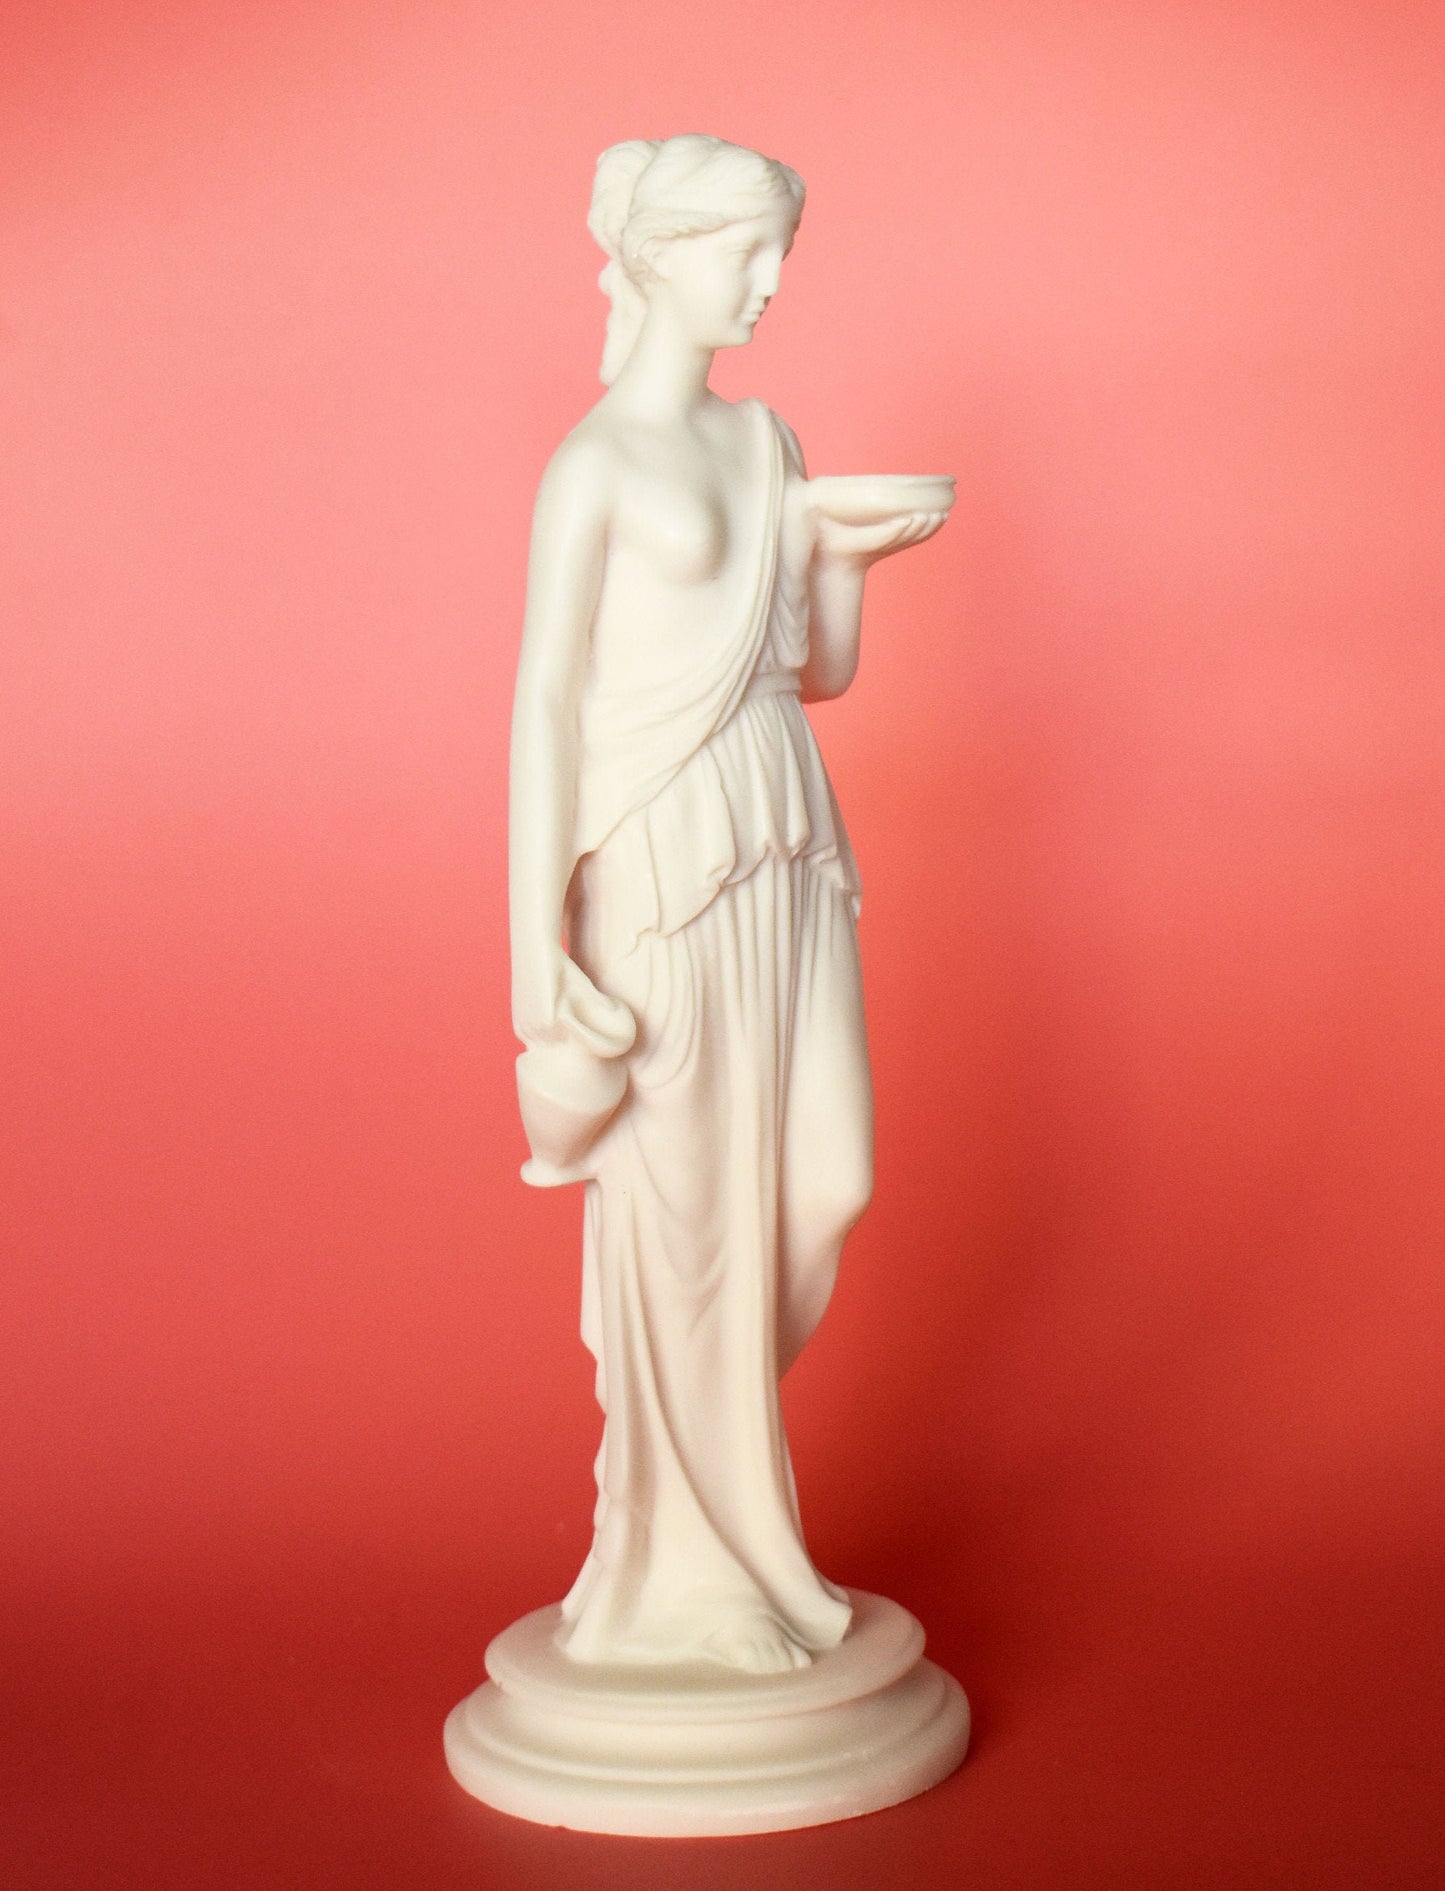 Hebe Juventas - Greek Roman Goddess of Youth or the Prime of Life - Cupbearer of the Gods - Nectar and Ambrosia -  Alabaster Statue